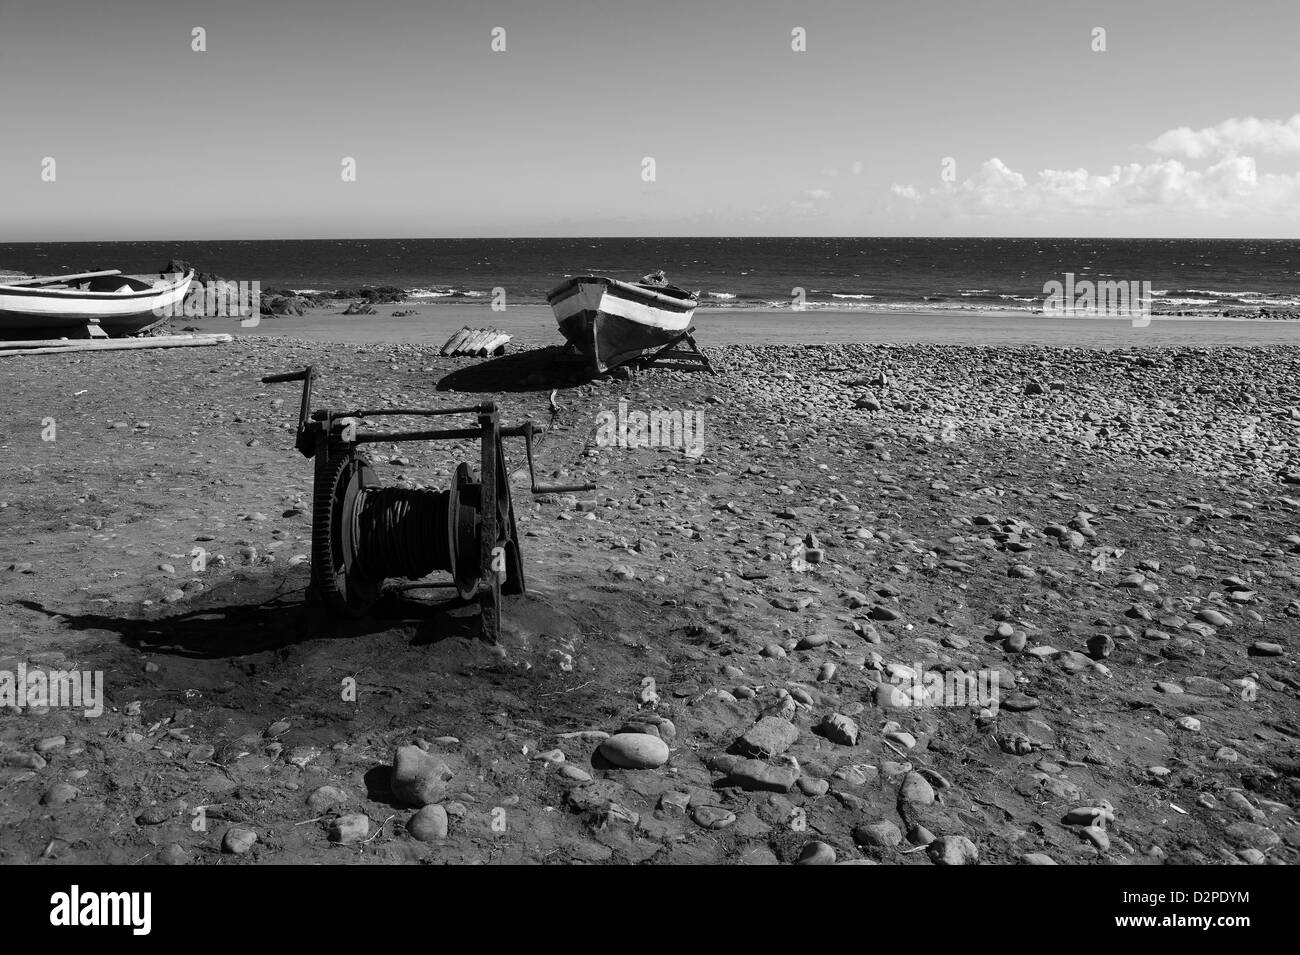 View of  old fishing boat and reel, onto an oceanic beach, Gran Canaria, Canary Islands, Spain Stock Photo